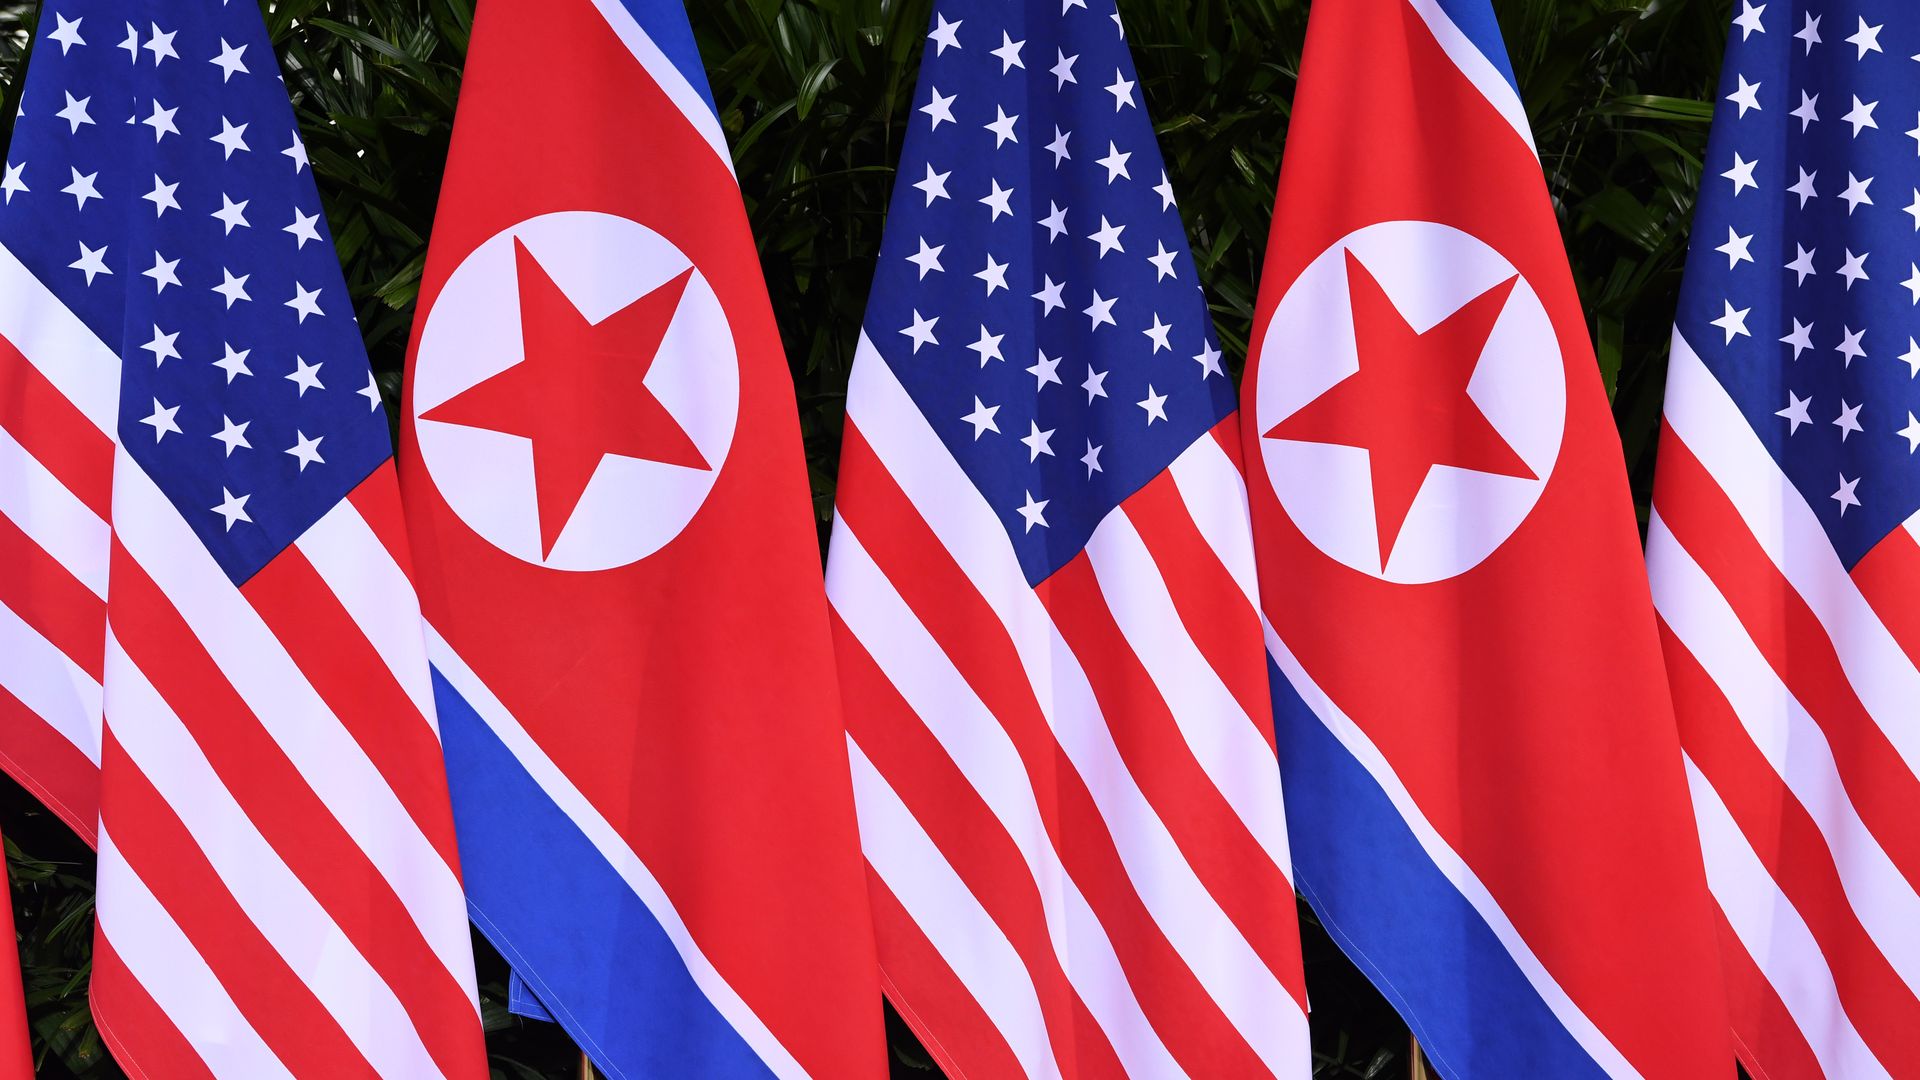 U.S. and N.K. flags flying by one another.